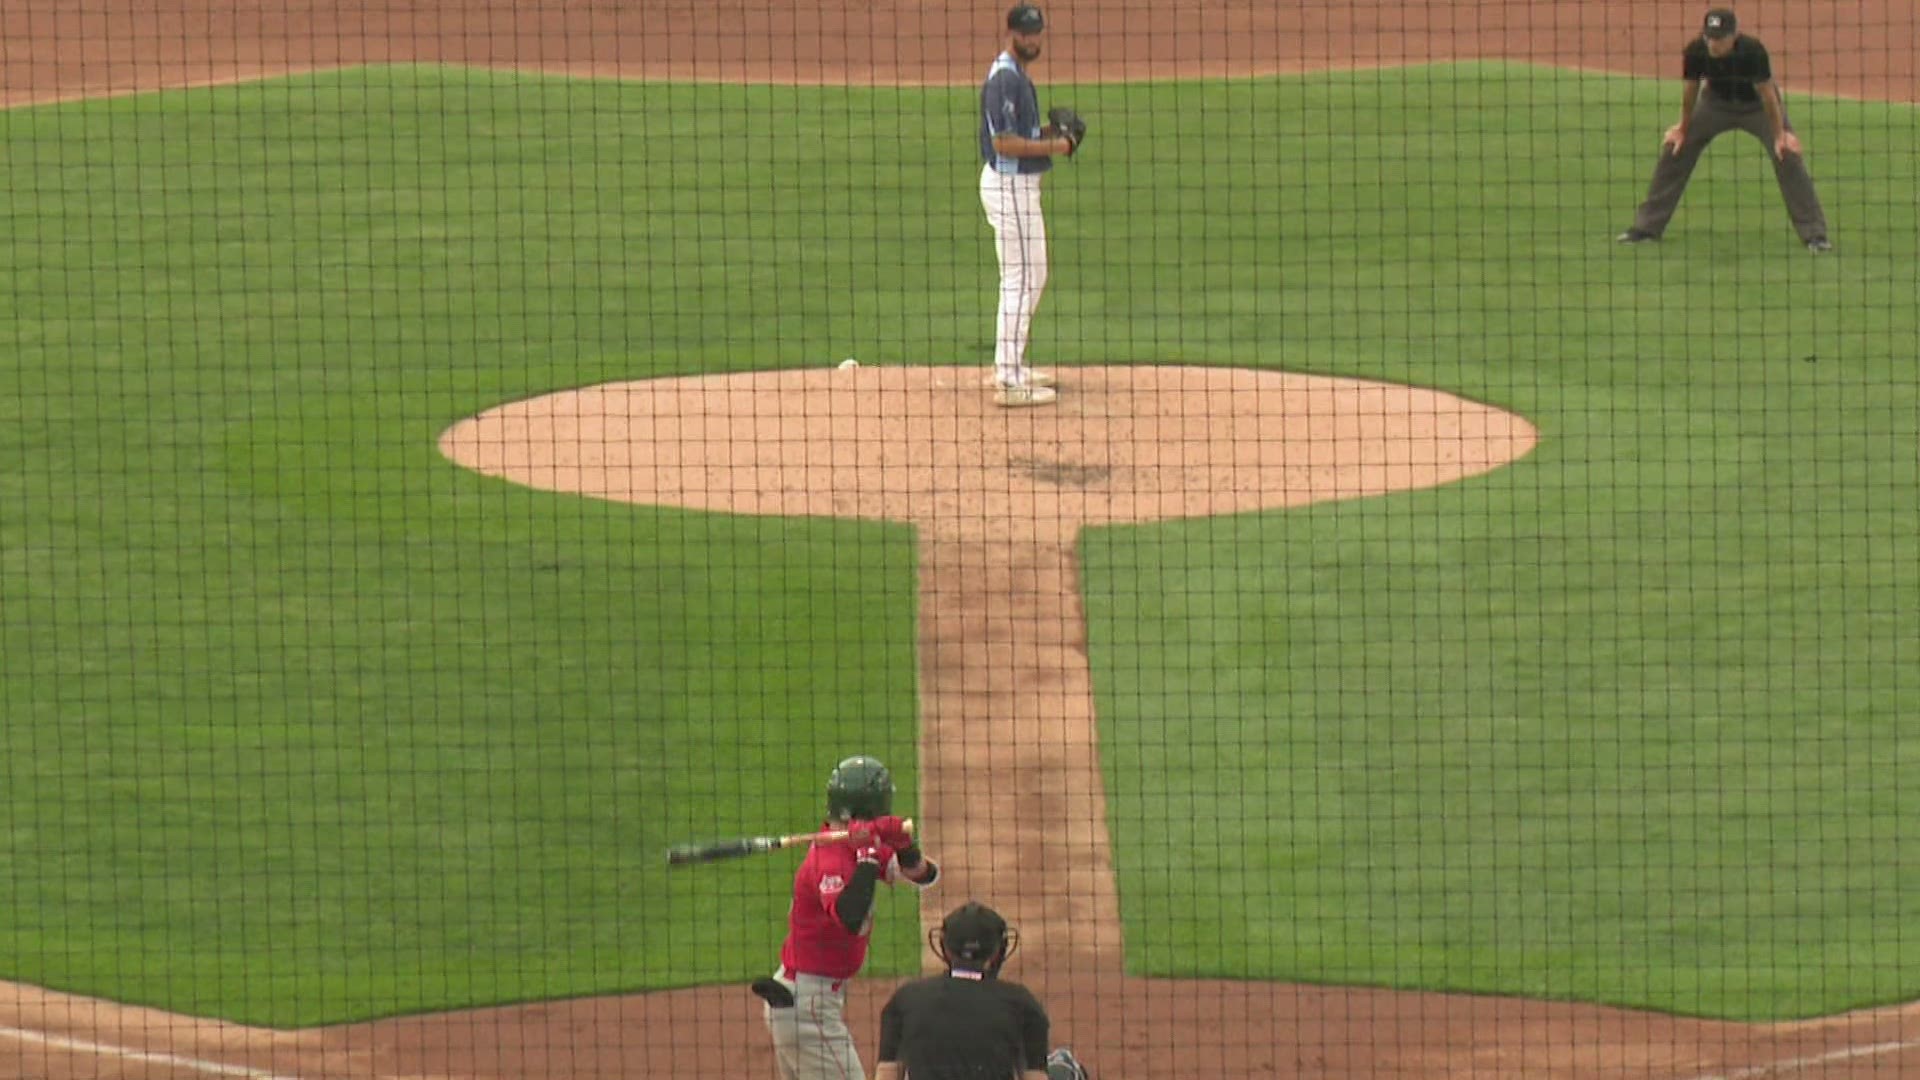 Whitecaps struck out 10 times tonight and Fort Wayne tacked on a pair in the 8th and 9th to win the game, 2-1.